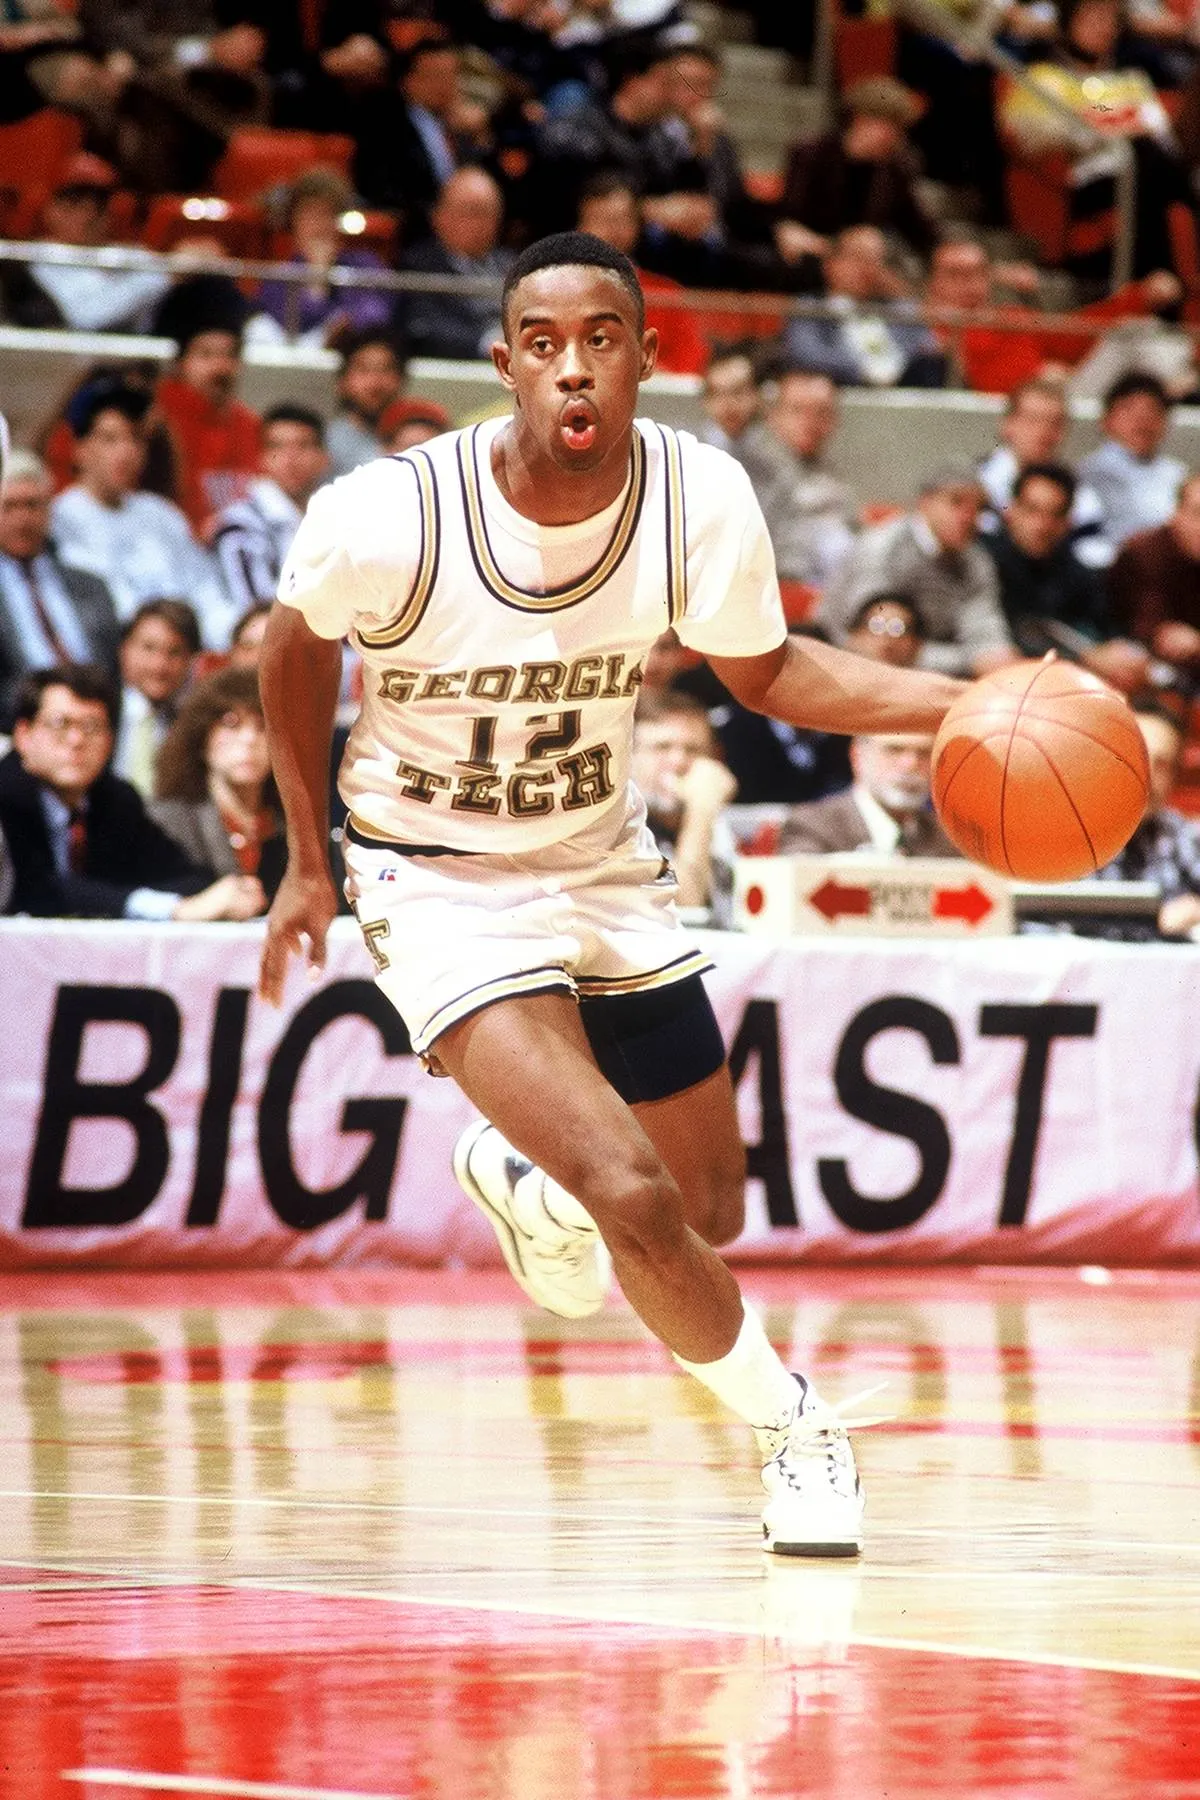 American basketball player Kenny Anderson of Georgia Tech's with the ball during an ACC Big East Challenge game against the University of Pittsburgh, Hartford, Connecticut, 1991